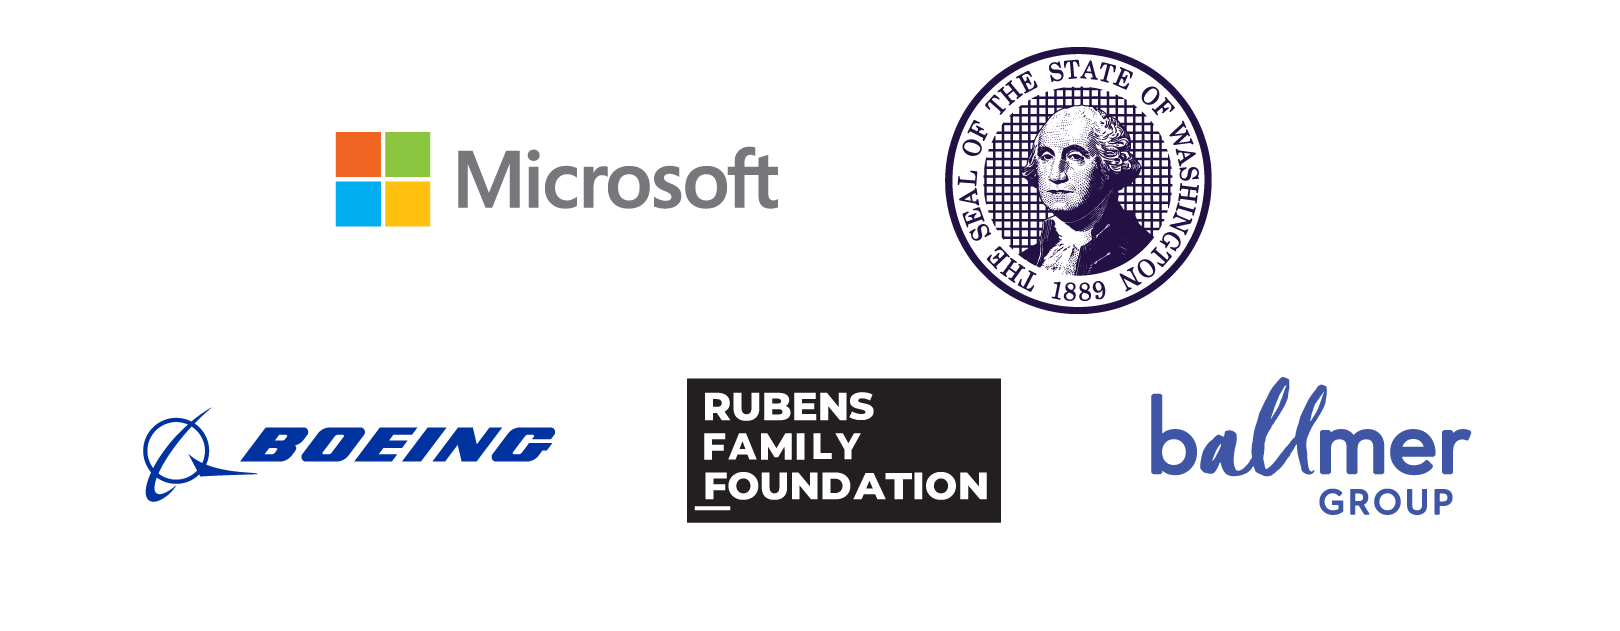 Logos for Microsoft, The State of Washington, Boeing, the Rubens Family Foundation, and the Ballmer Group